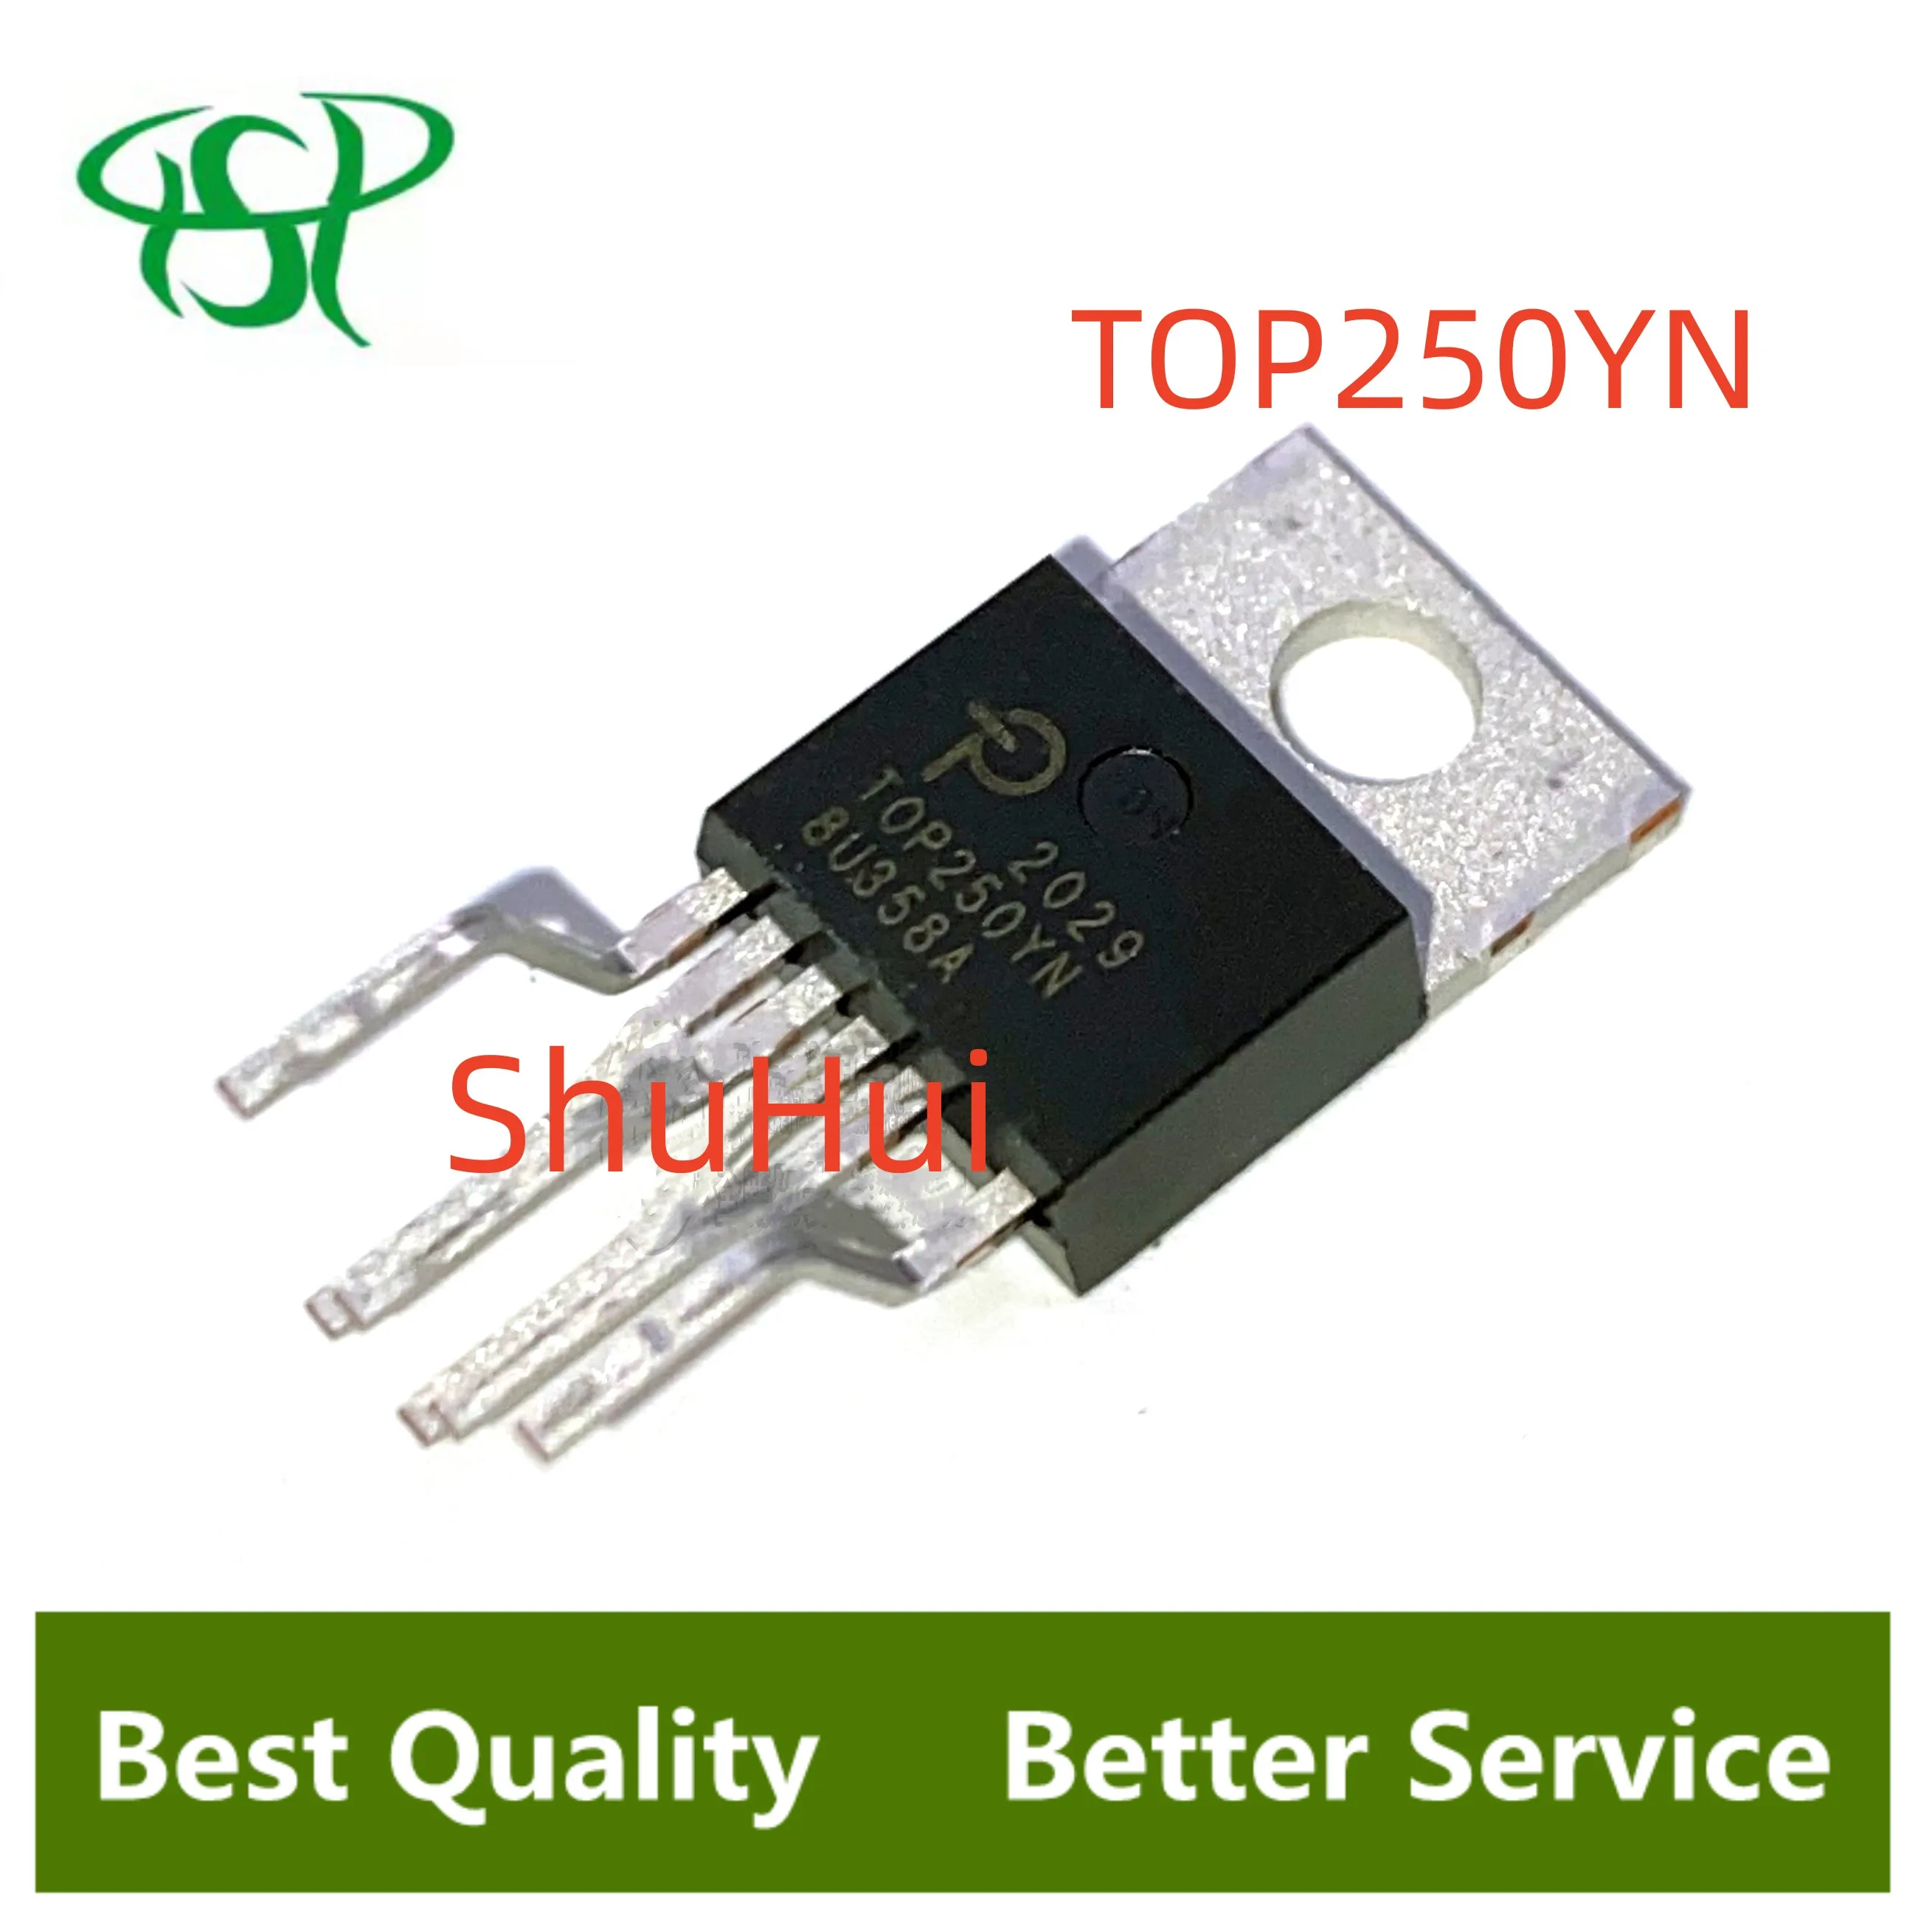 

1pcs~10pcs TOP250YN TO220 TOP250Y TOP250 TO-220 IC 100% NEW